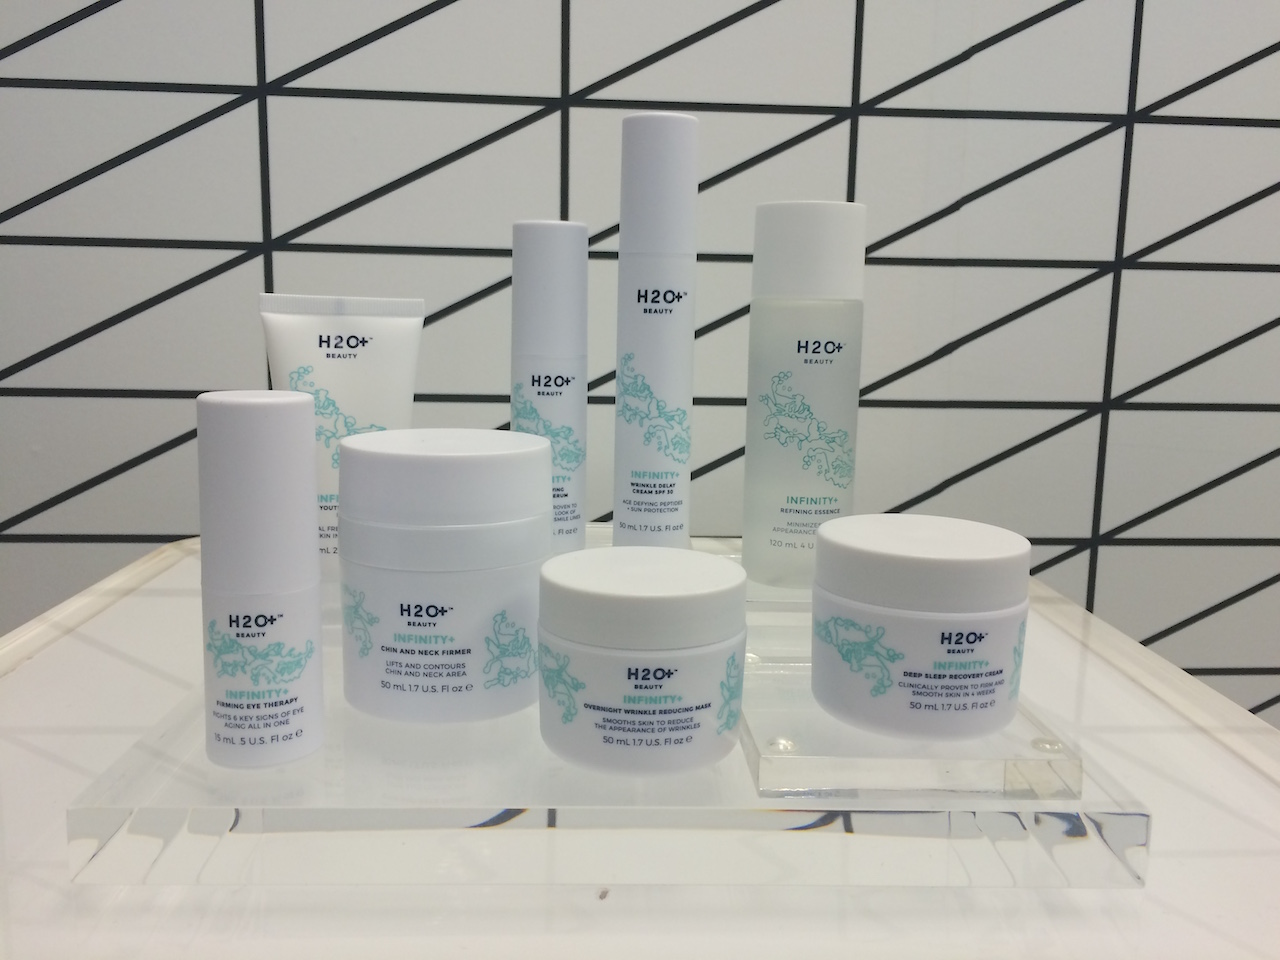 One of H20+'s new skincare ranges